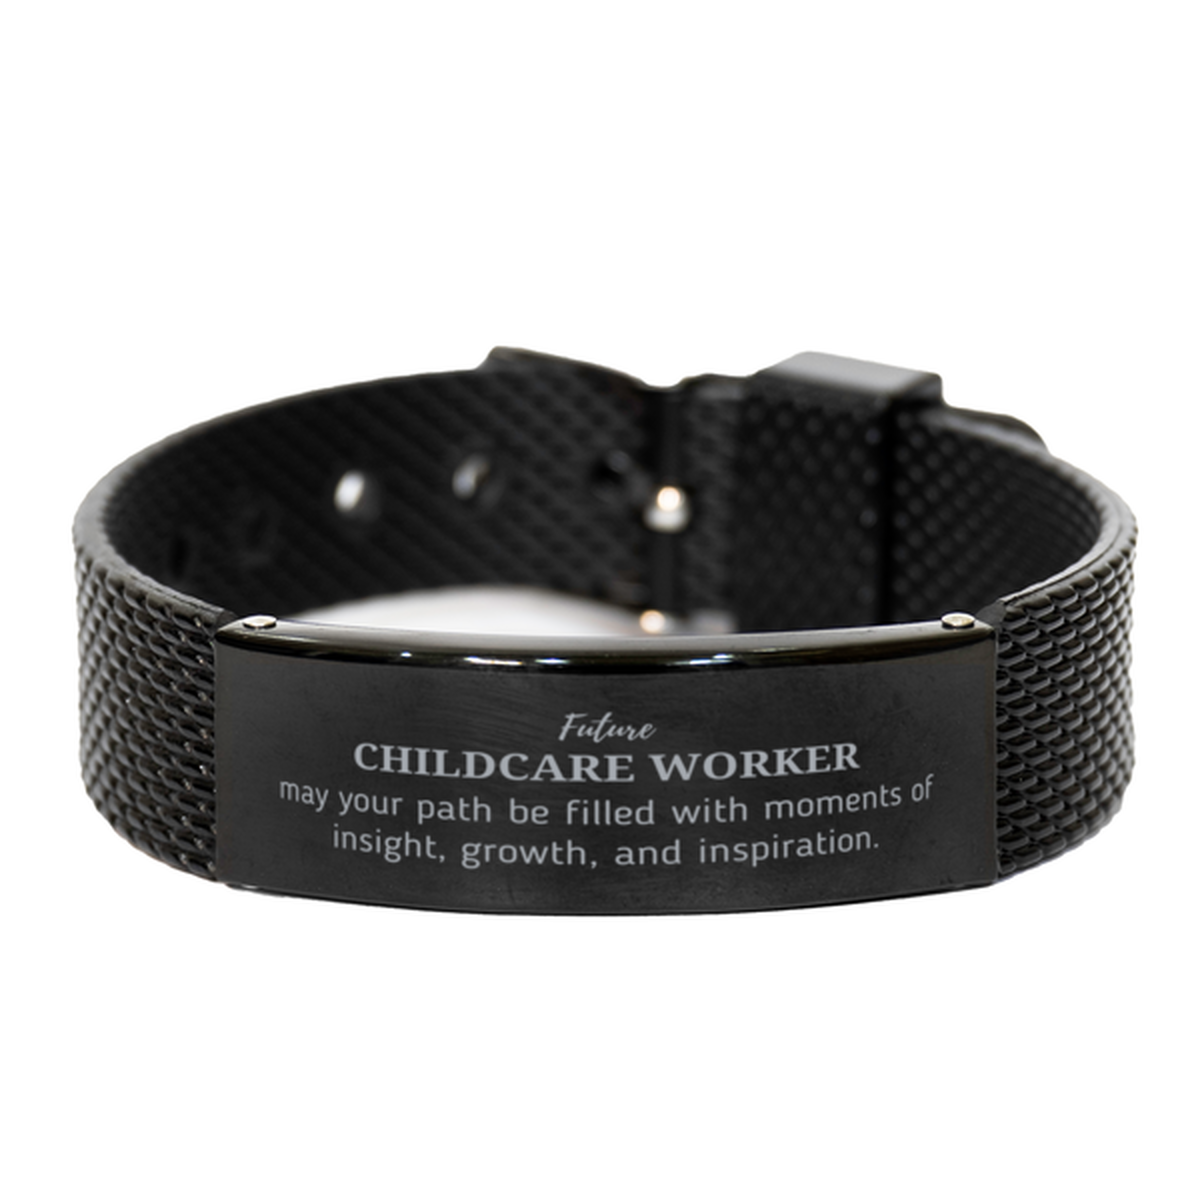 Future Childcare Worker Gifts, May your path be filled with moments of insight, Graduation Gifts for New Childcare Worker, Christmas Unique Black Shark Mesh Bracelet For Men, Women, Friends